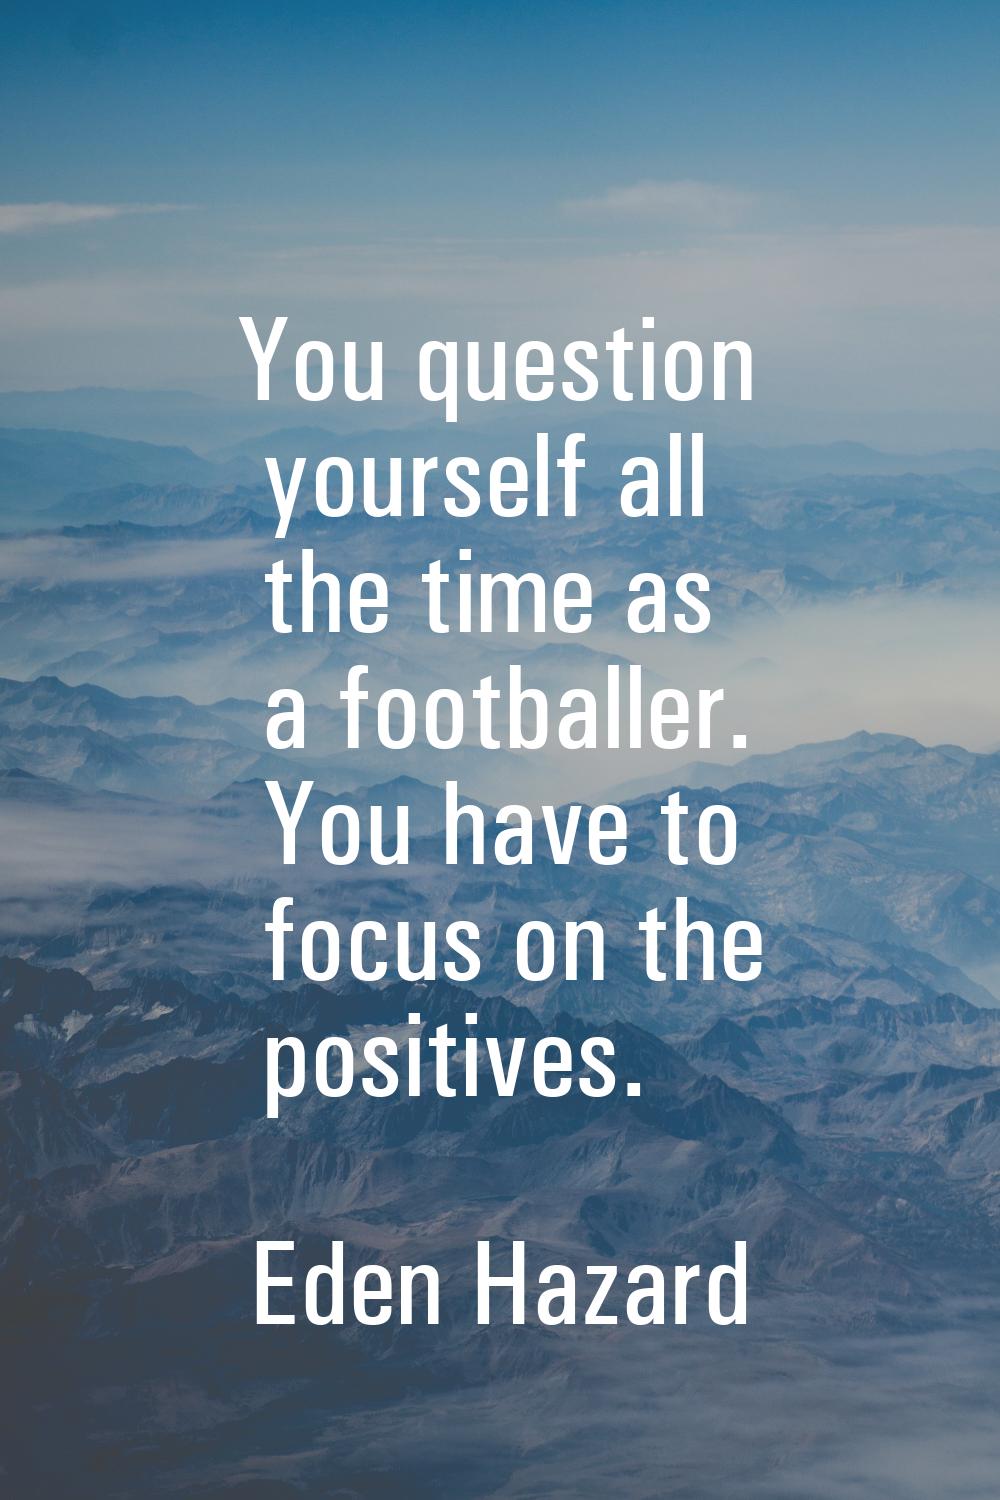 You question yourself all the time as a footballer. You have to focus on the positives.